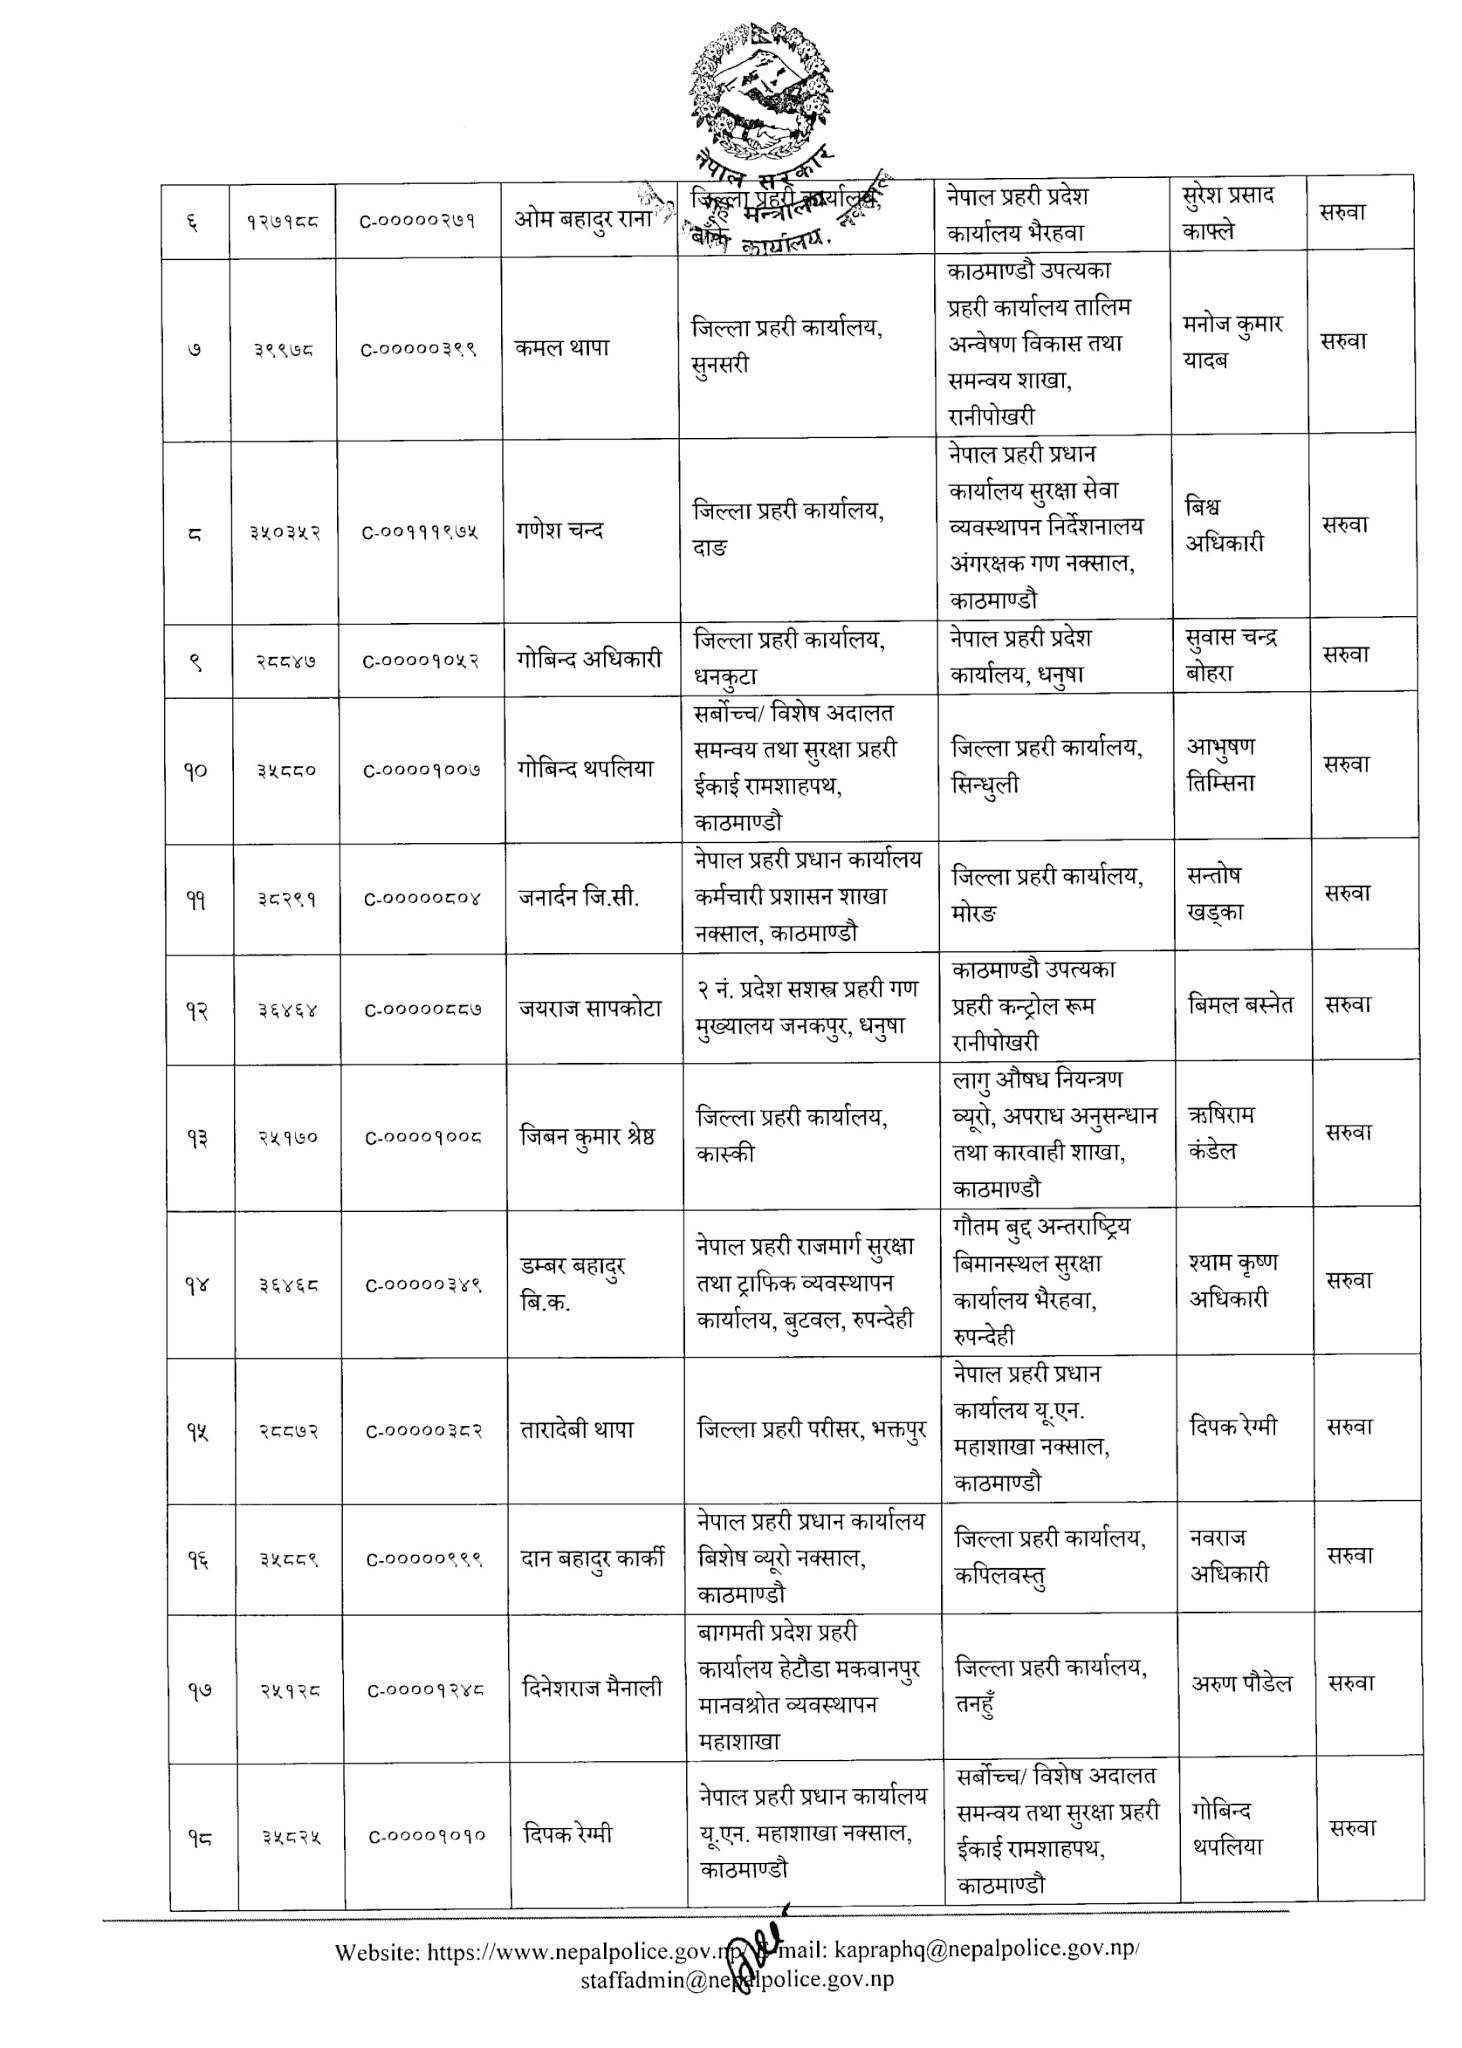 Nepal Police - Transfer List of 52 Superintendent of Nepal Police (SP)